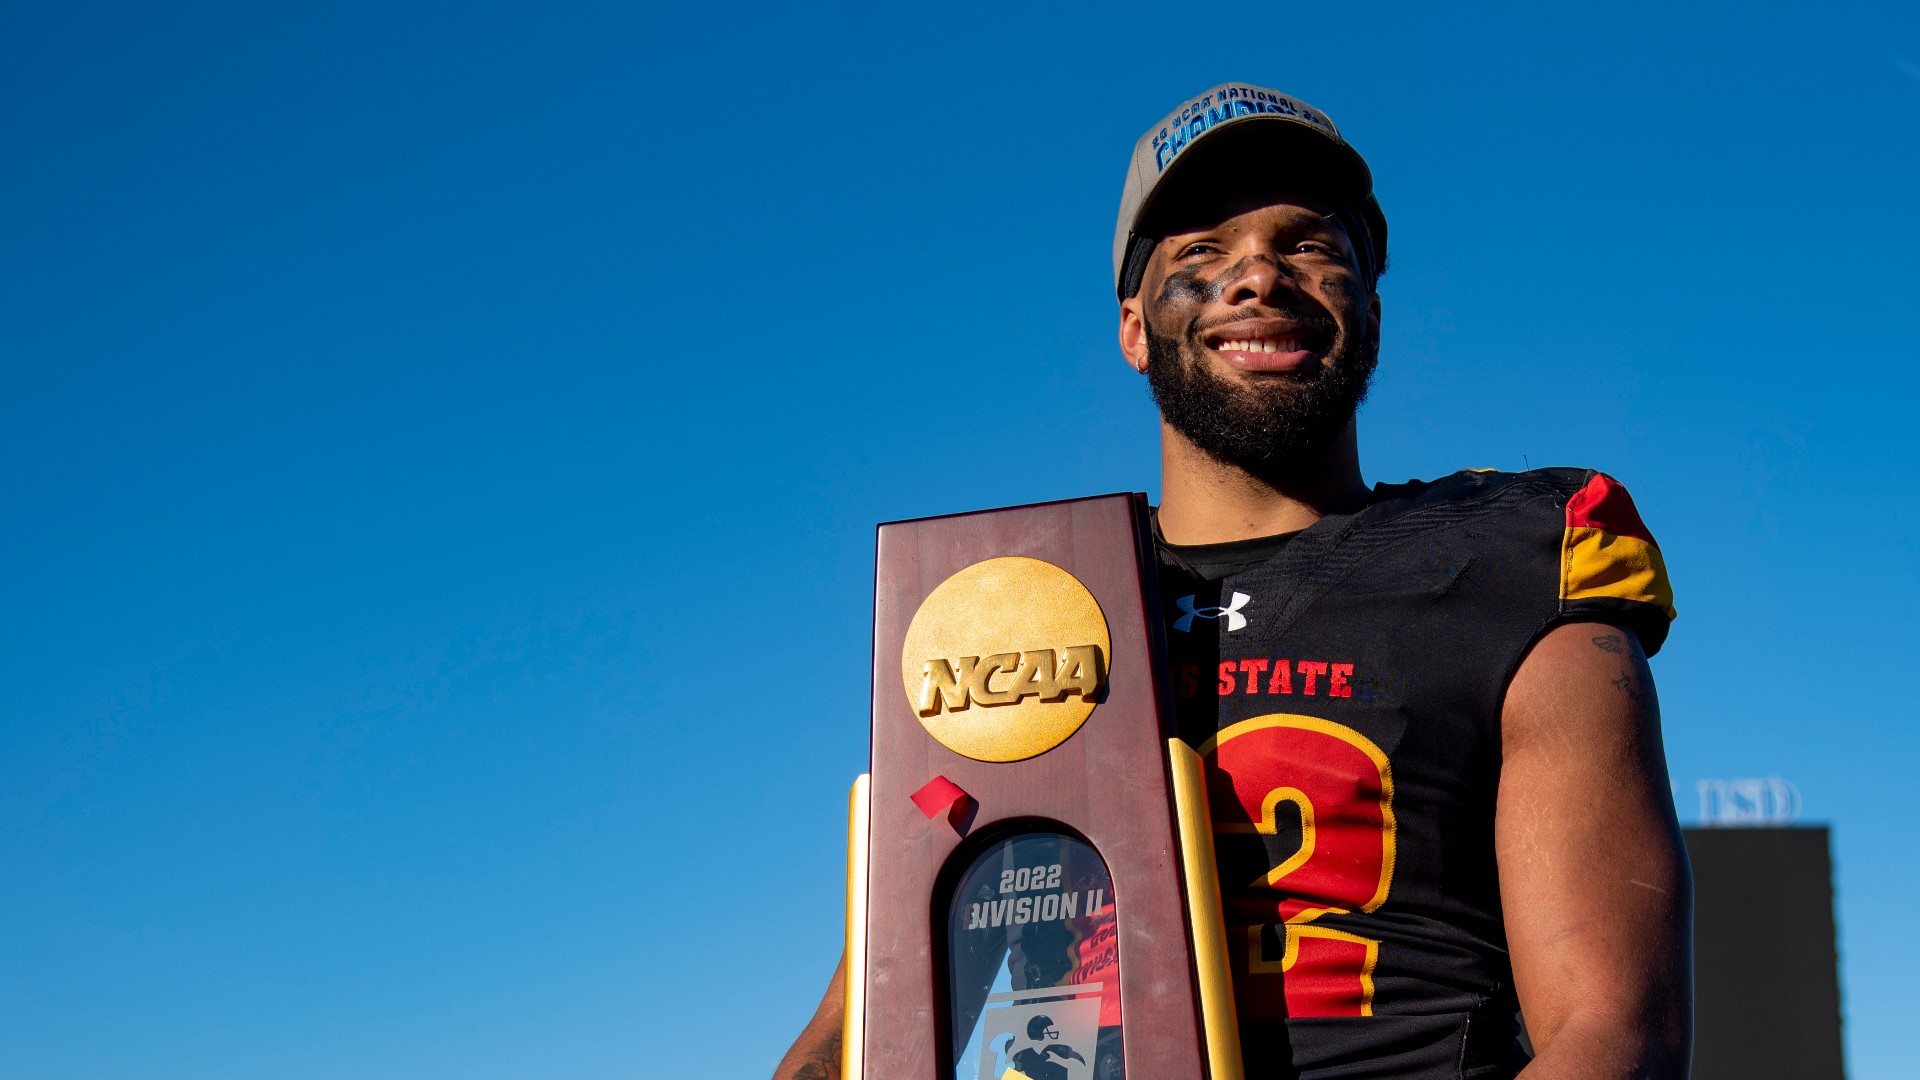 Ferris State University's football team has accepted a historic invitation to the white house after back-to-back NCAA Division II National Championships.